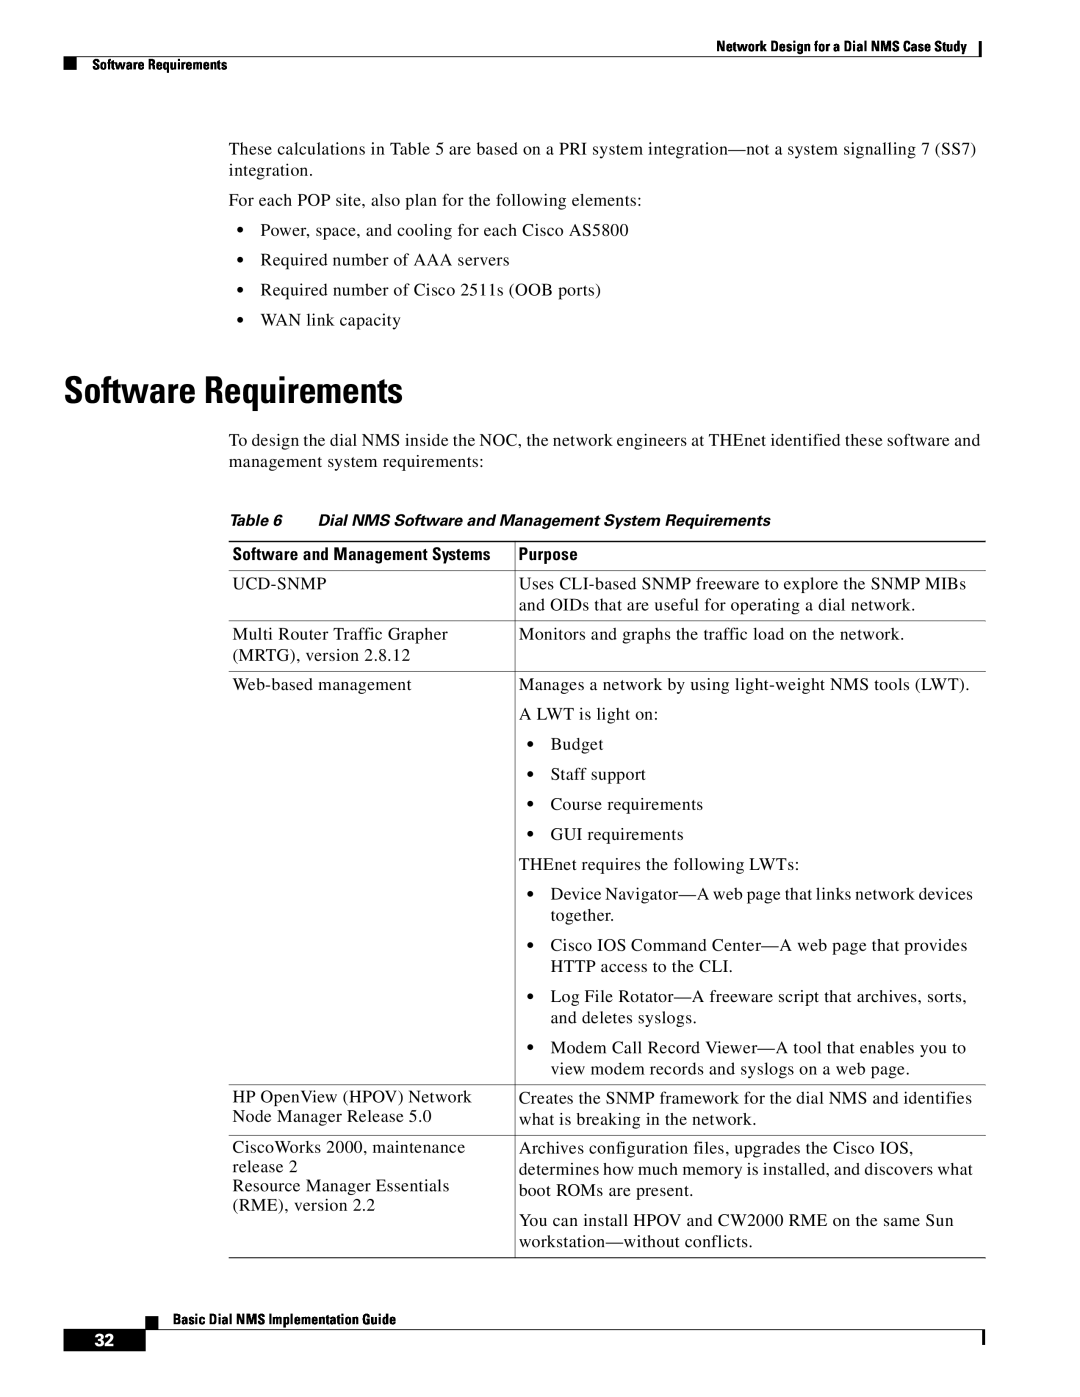 Cisco Systems manual Software Requirements, Dial NMS Software and Management System Requirements 